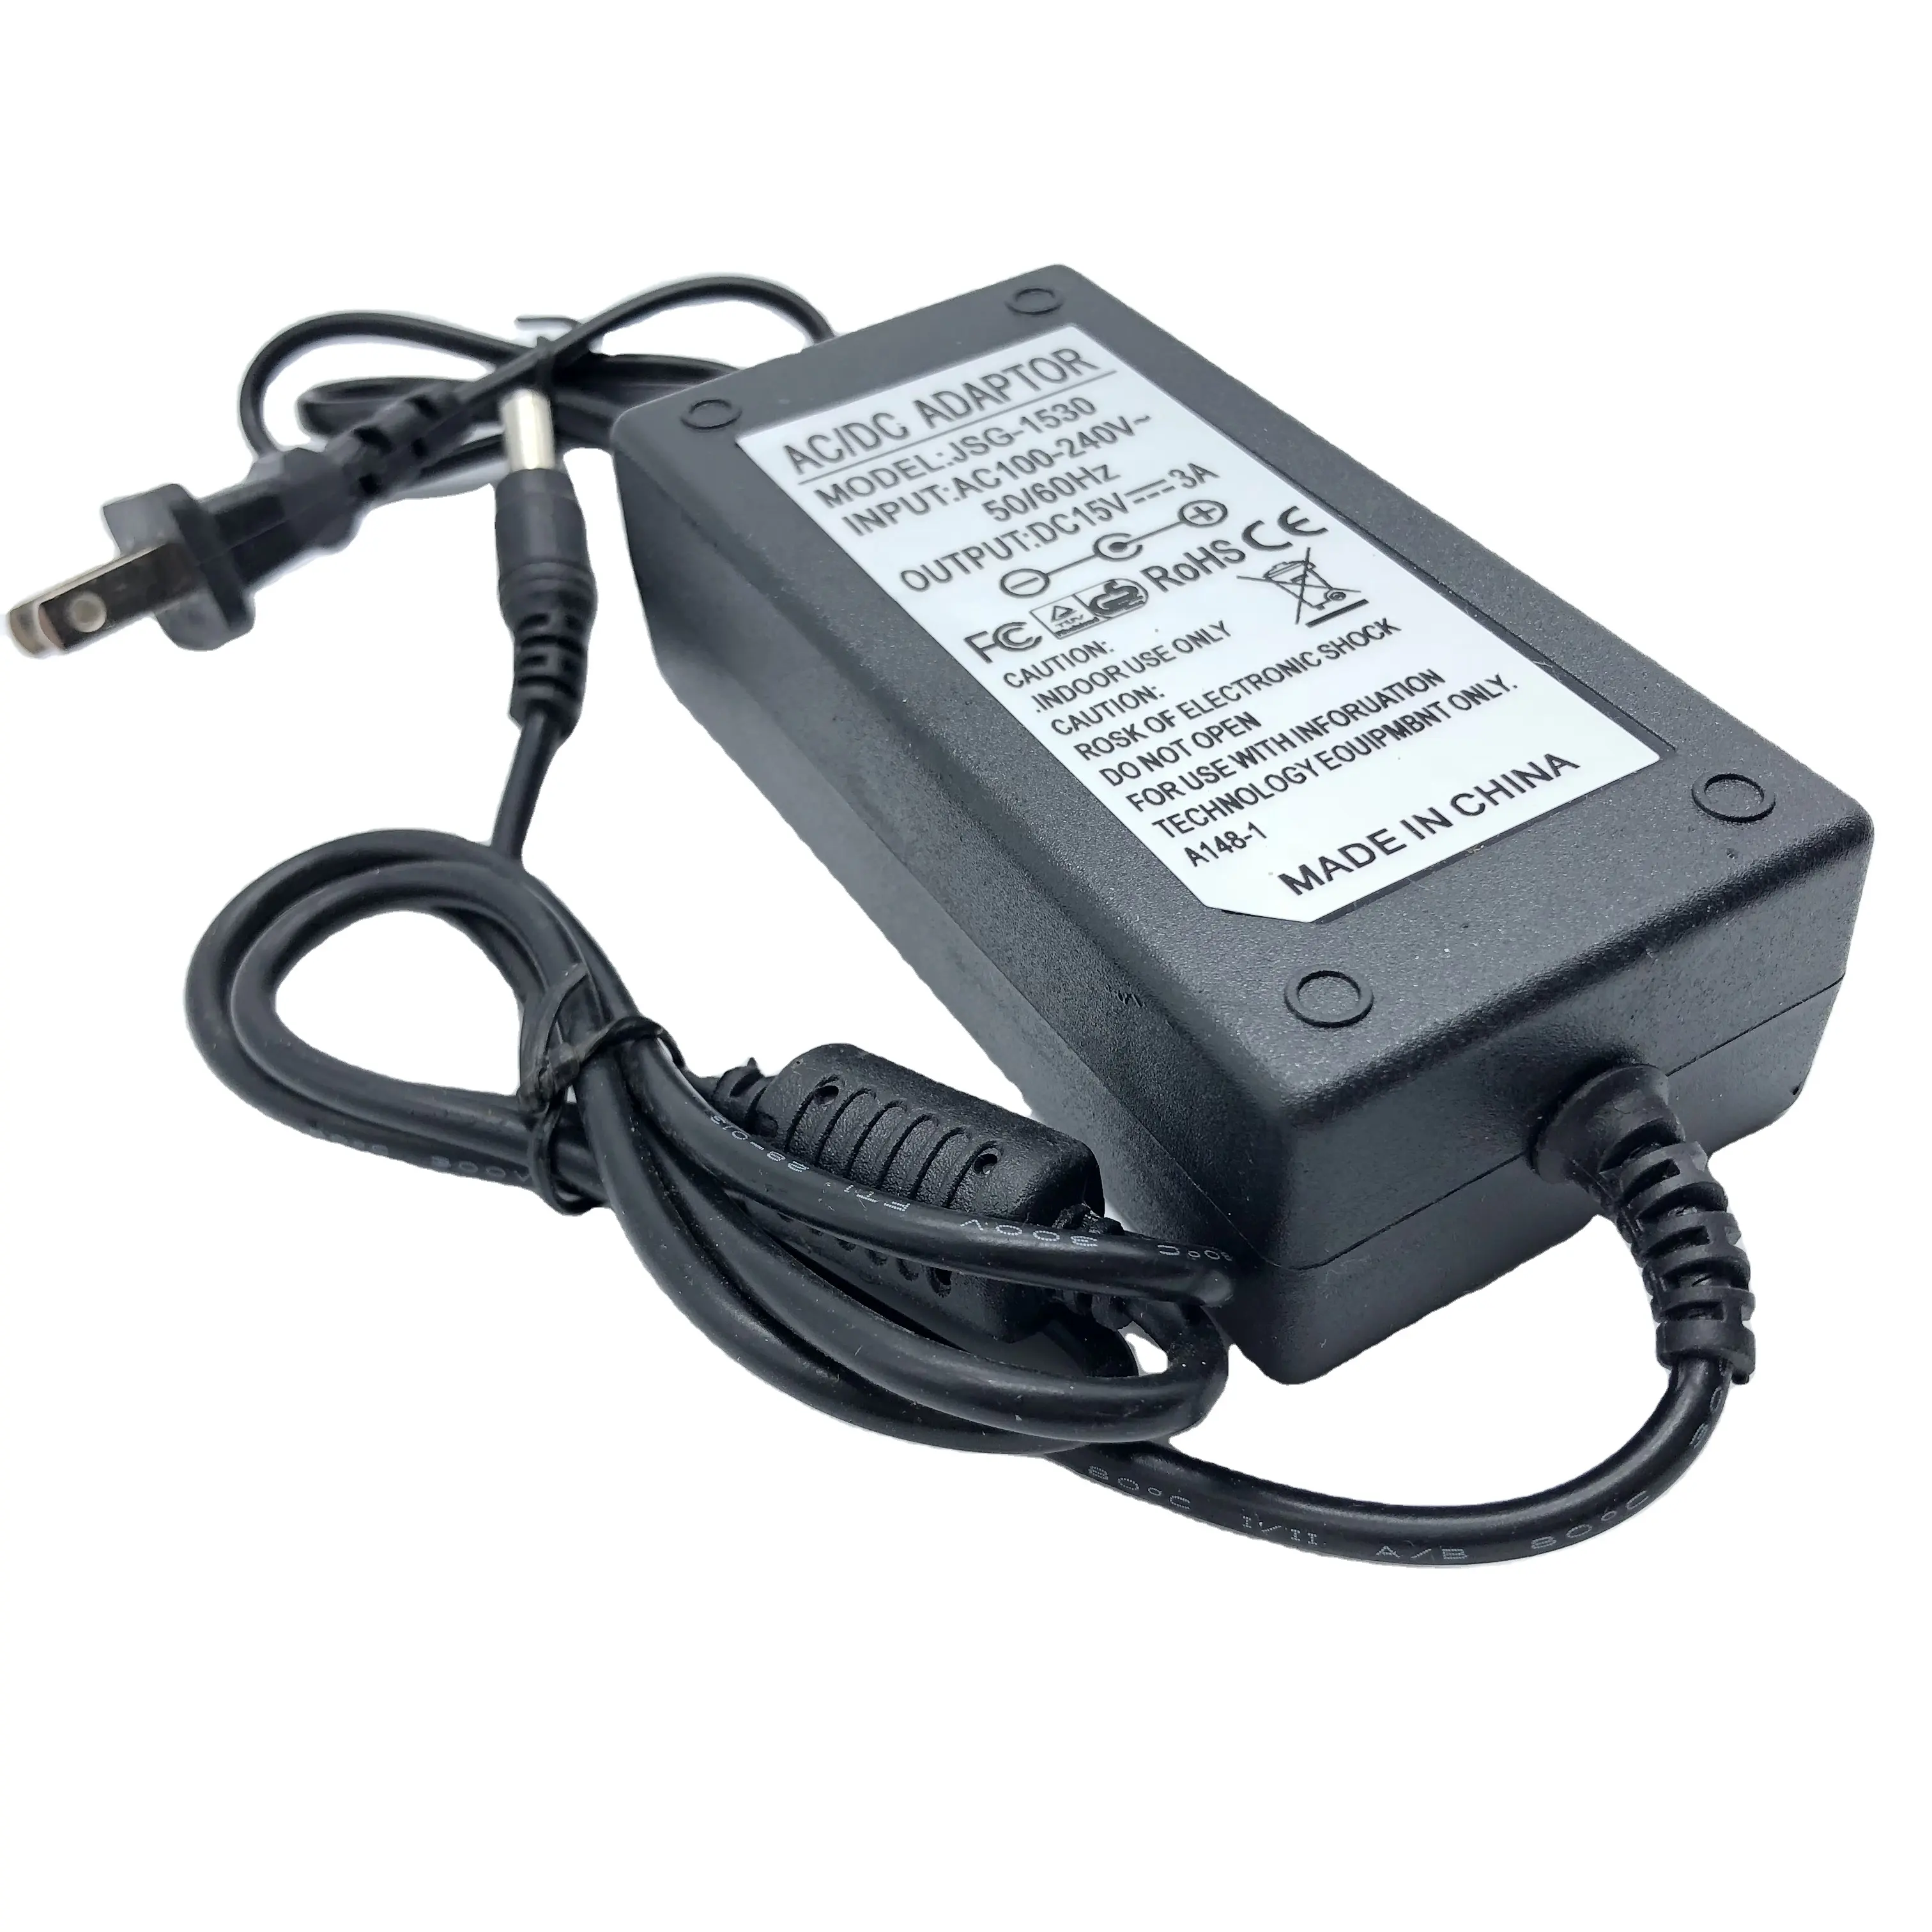 DC AC power supply 15V3A power adapter audio charger 15V3A video player Switching Power Supply Adaptor